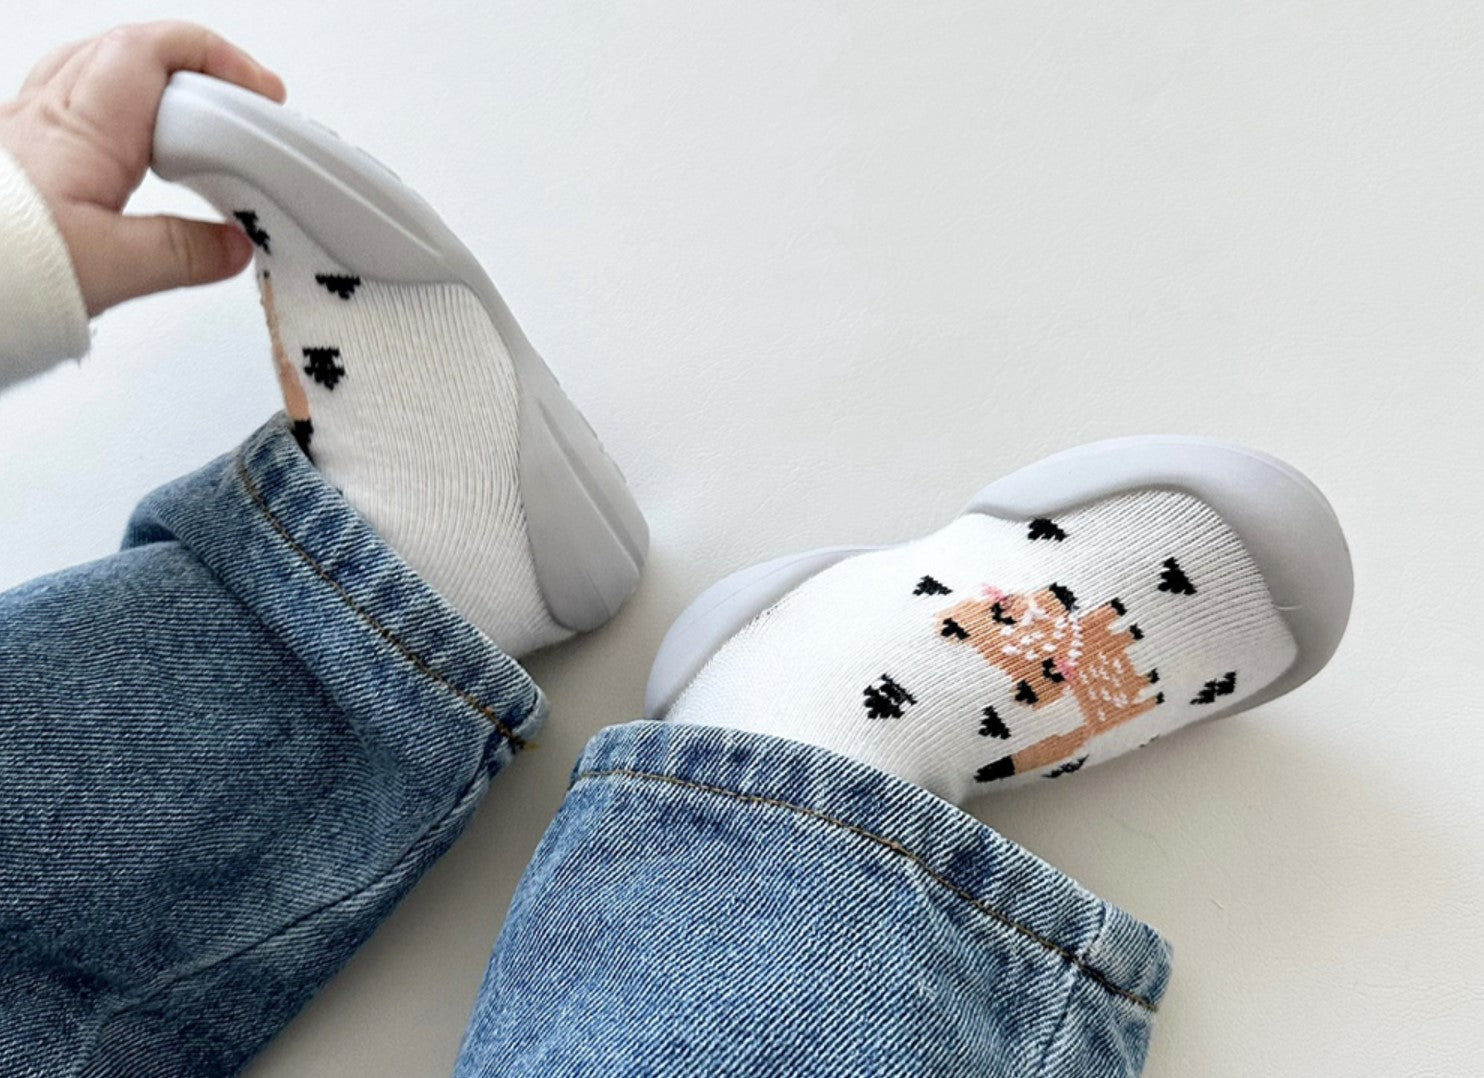 Smile Fox Baby First Walking Shoes: Elastic baby shoes with honeycomb outsole for slip resistance. Gentle flex for delicate baby foot cartilage, lightweight design for growth and learning to walk.